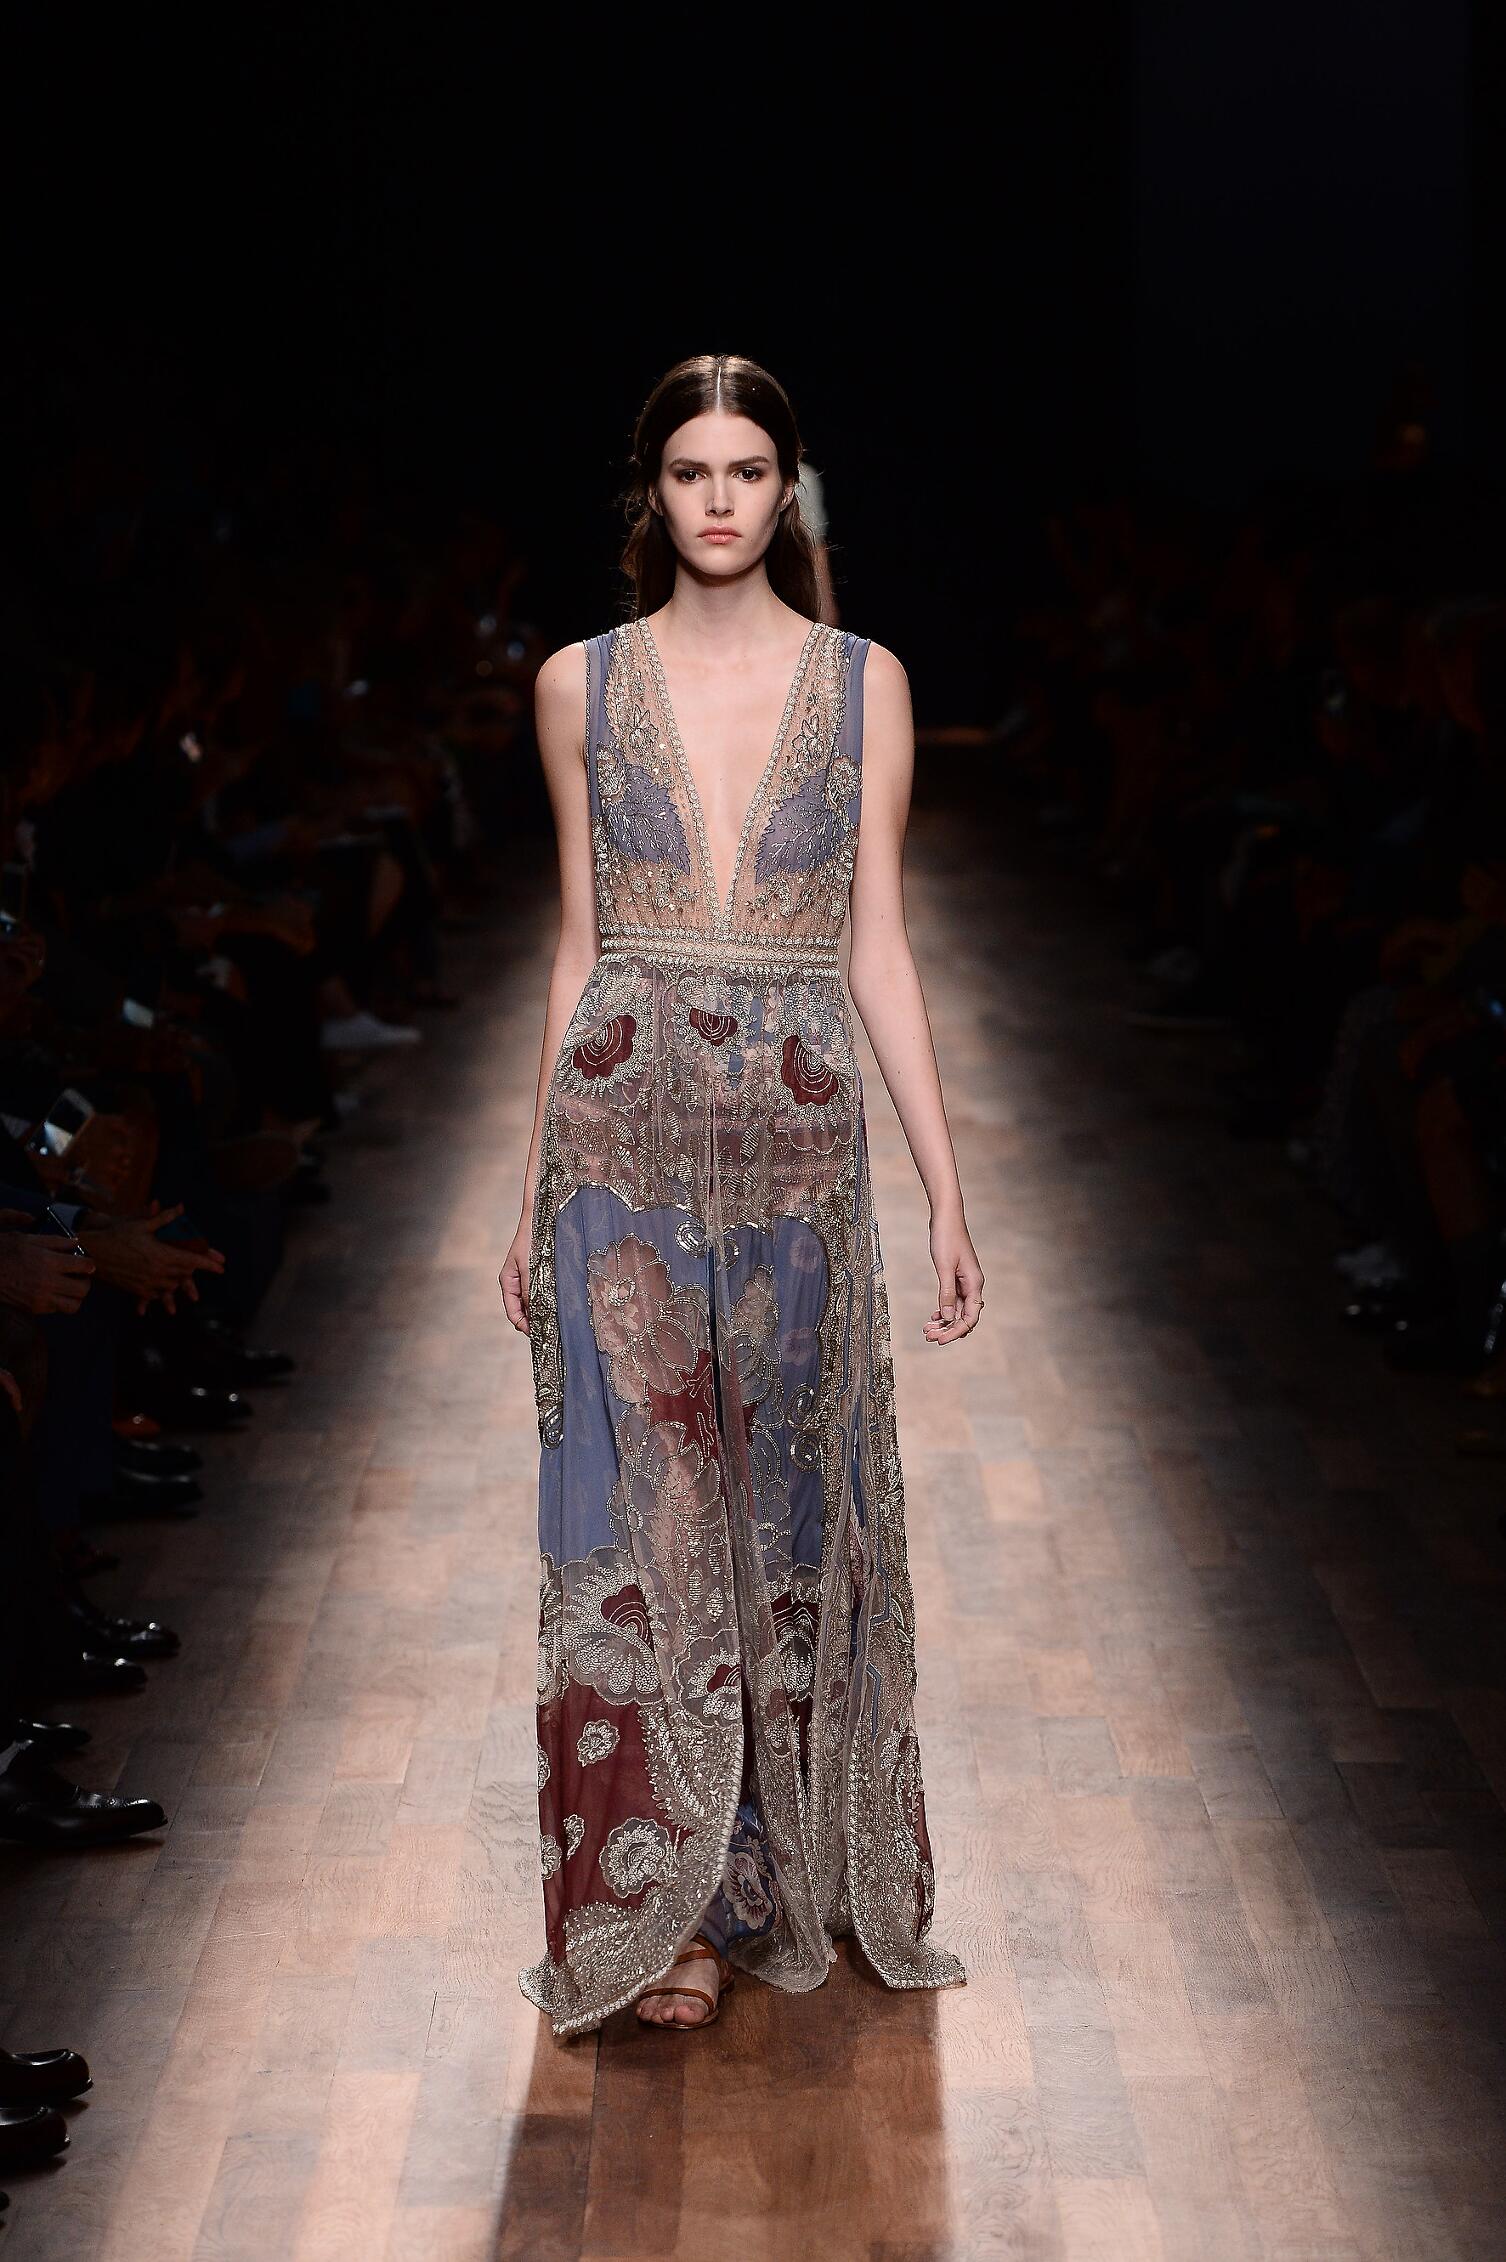 VALENTINO SPRING SUMMER 2015 WOMEN'S COLLECTION | The Skinny Beep